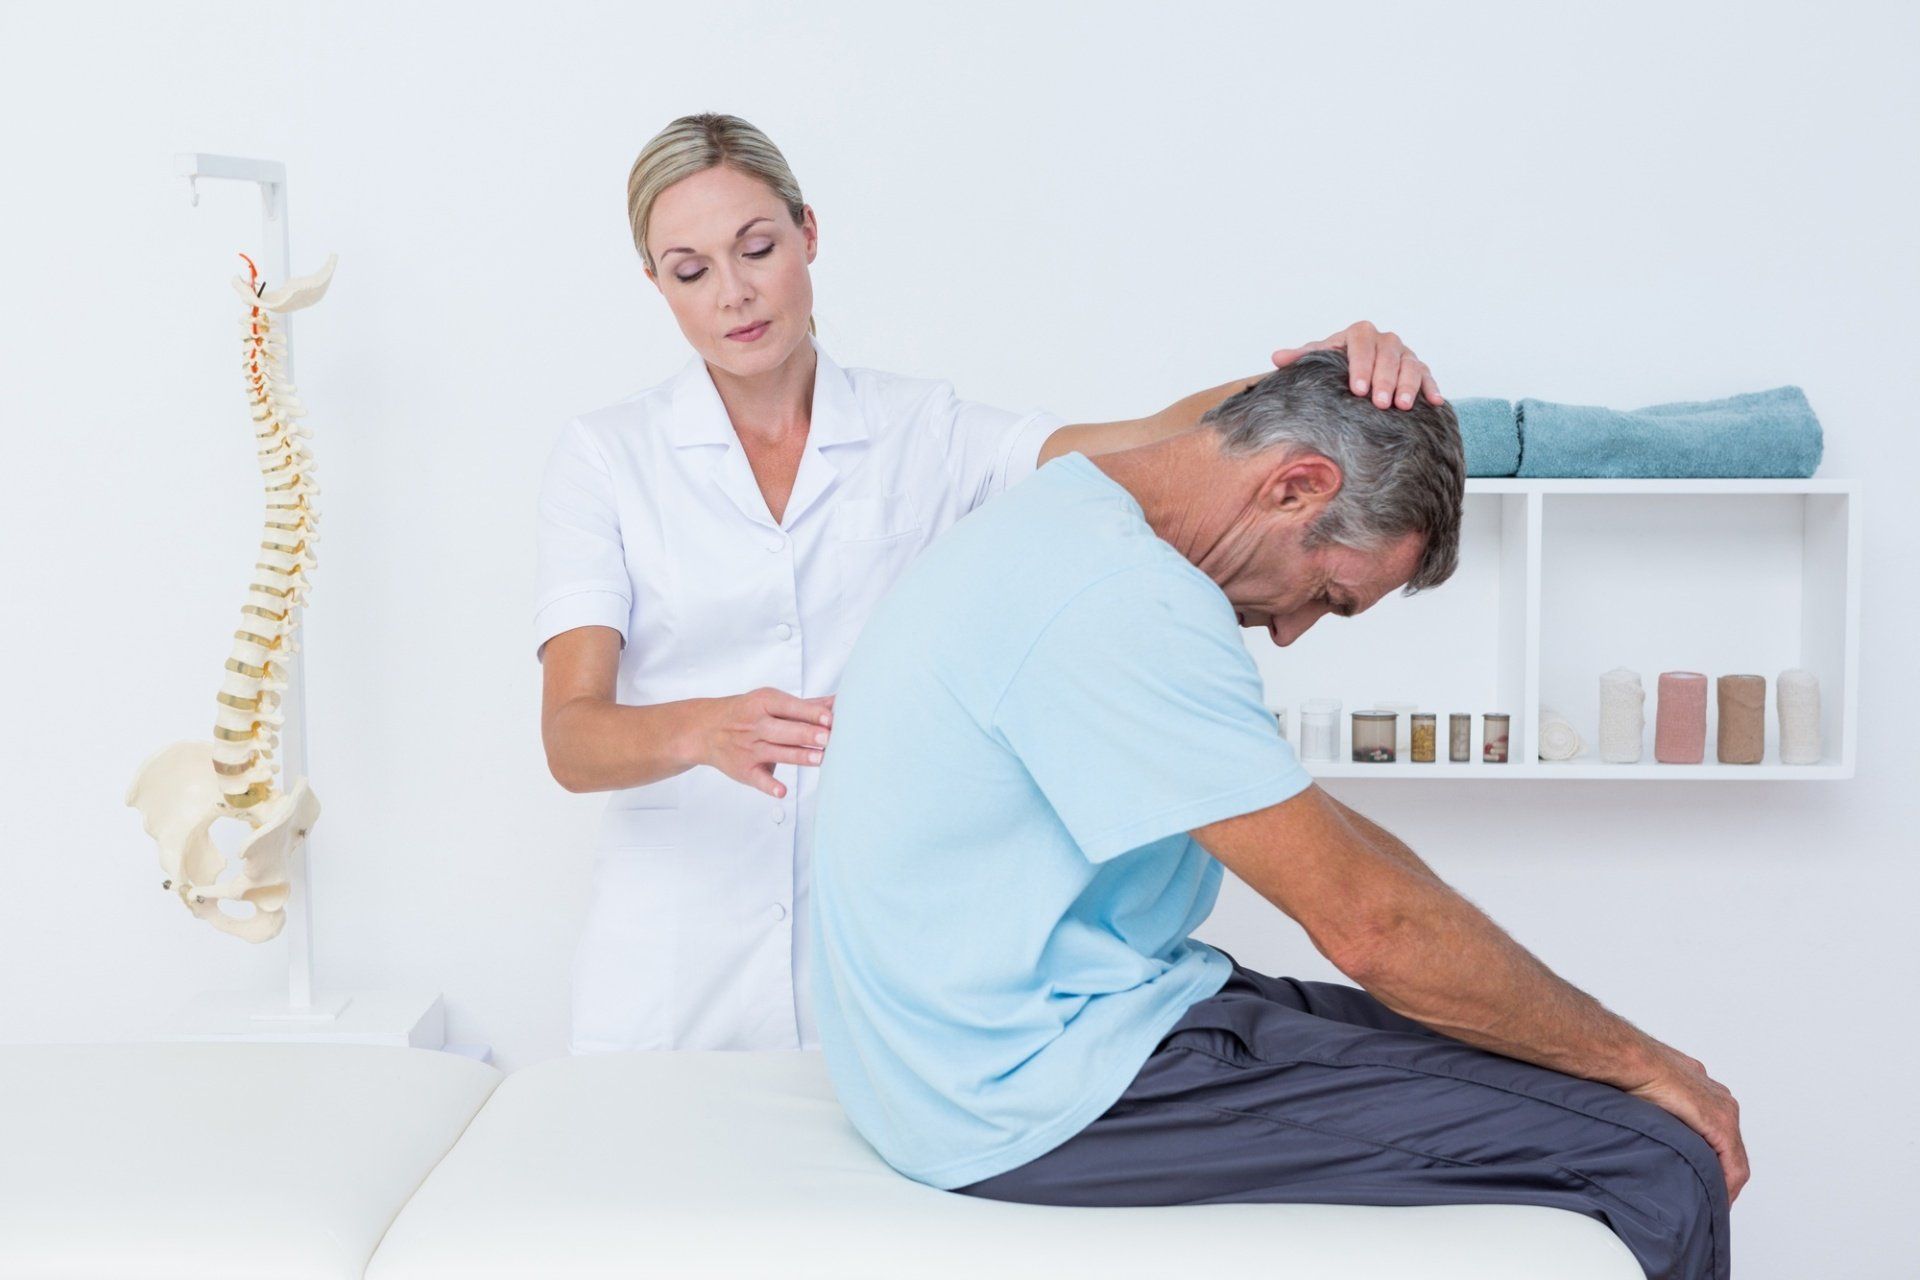 Chiropractor vs. Doctor: Which Professional Should You See?